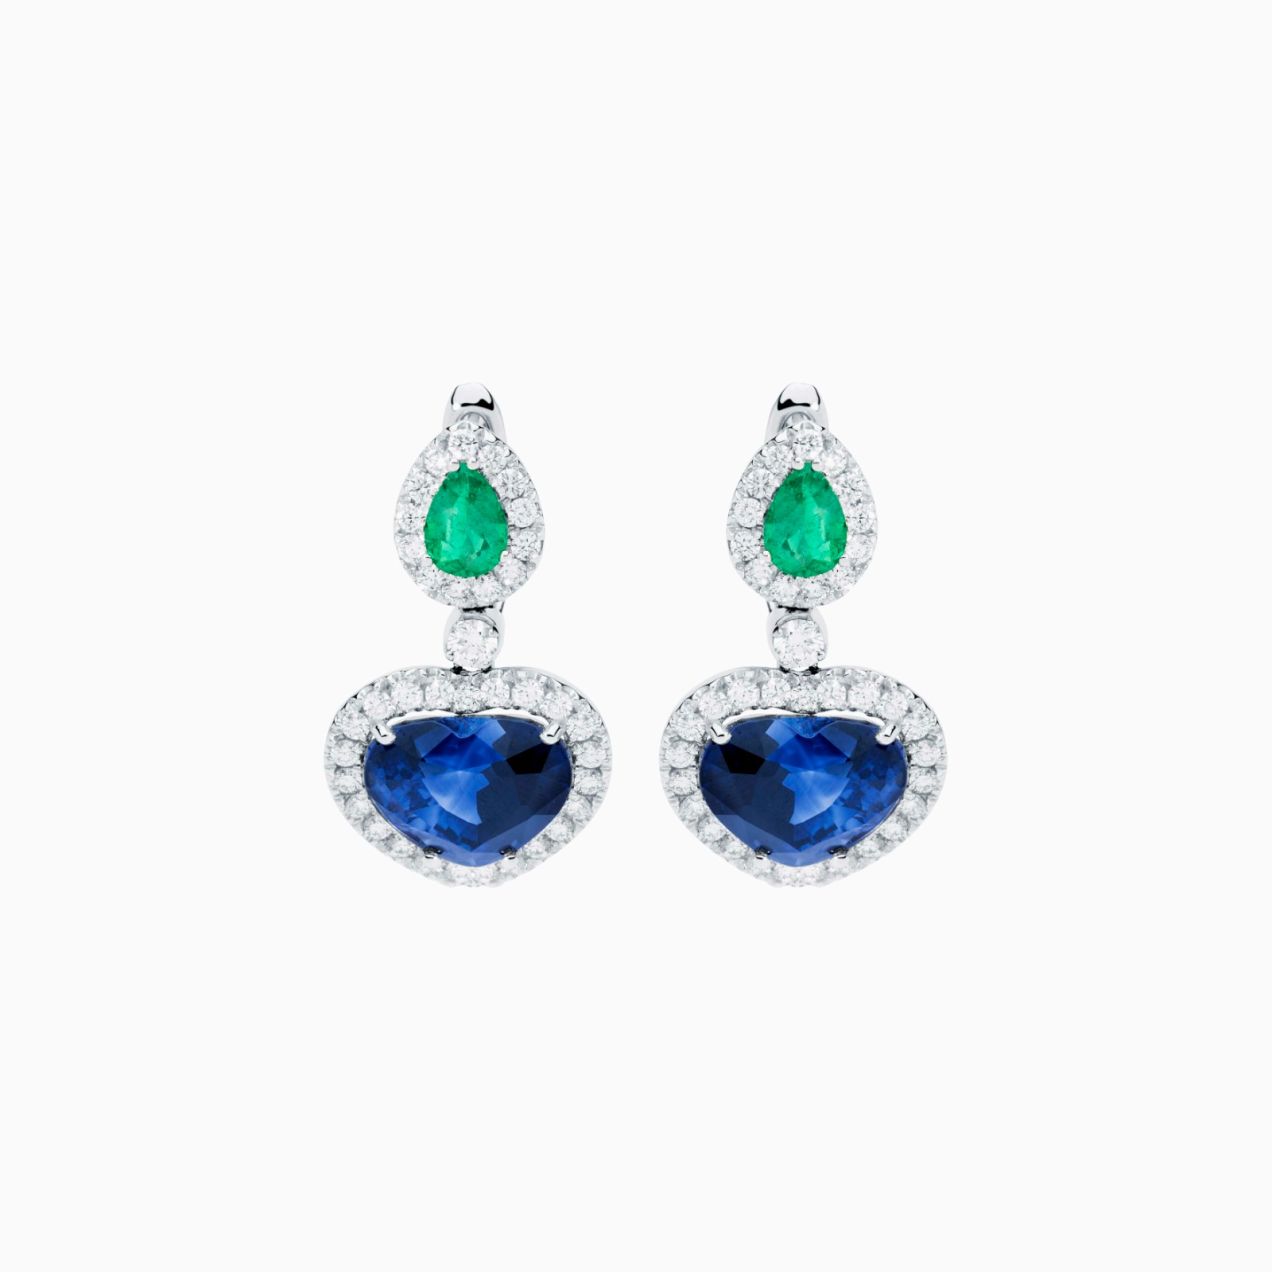 White gold earrings with sapphires and emeralds